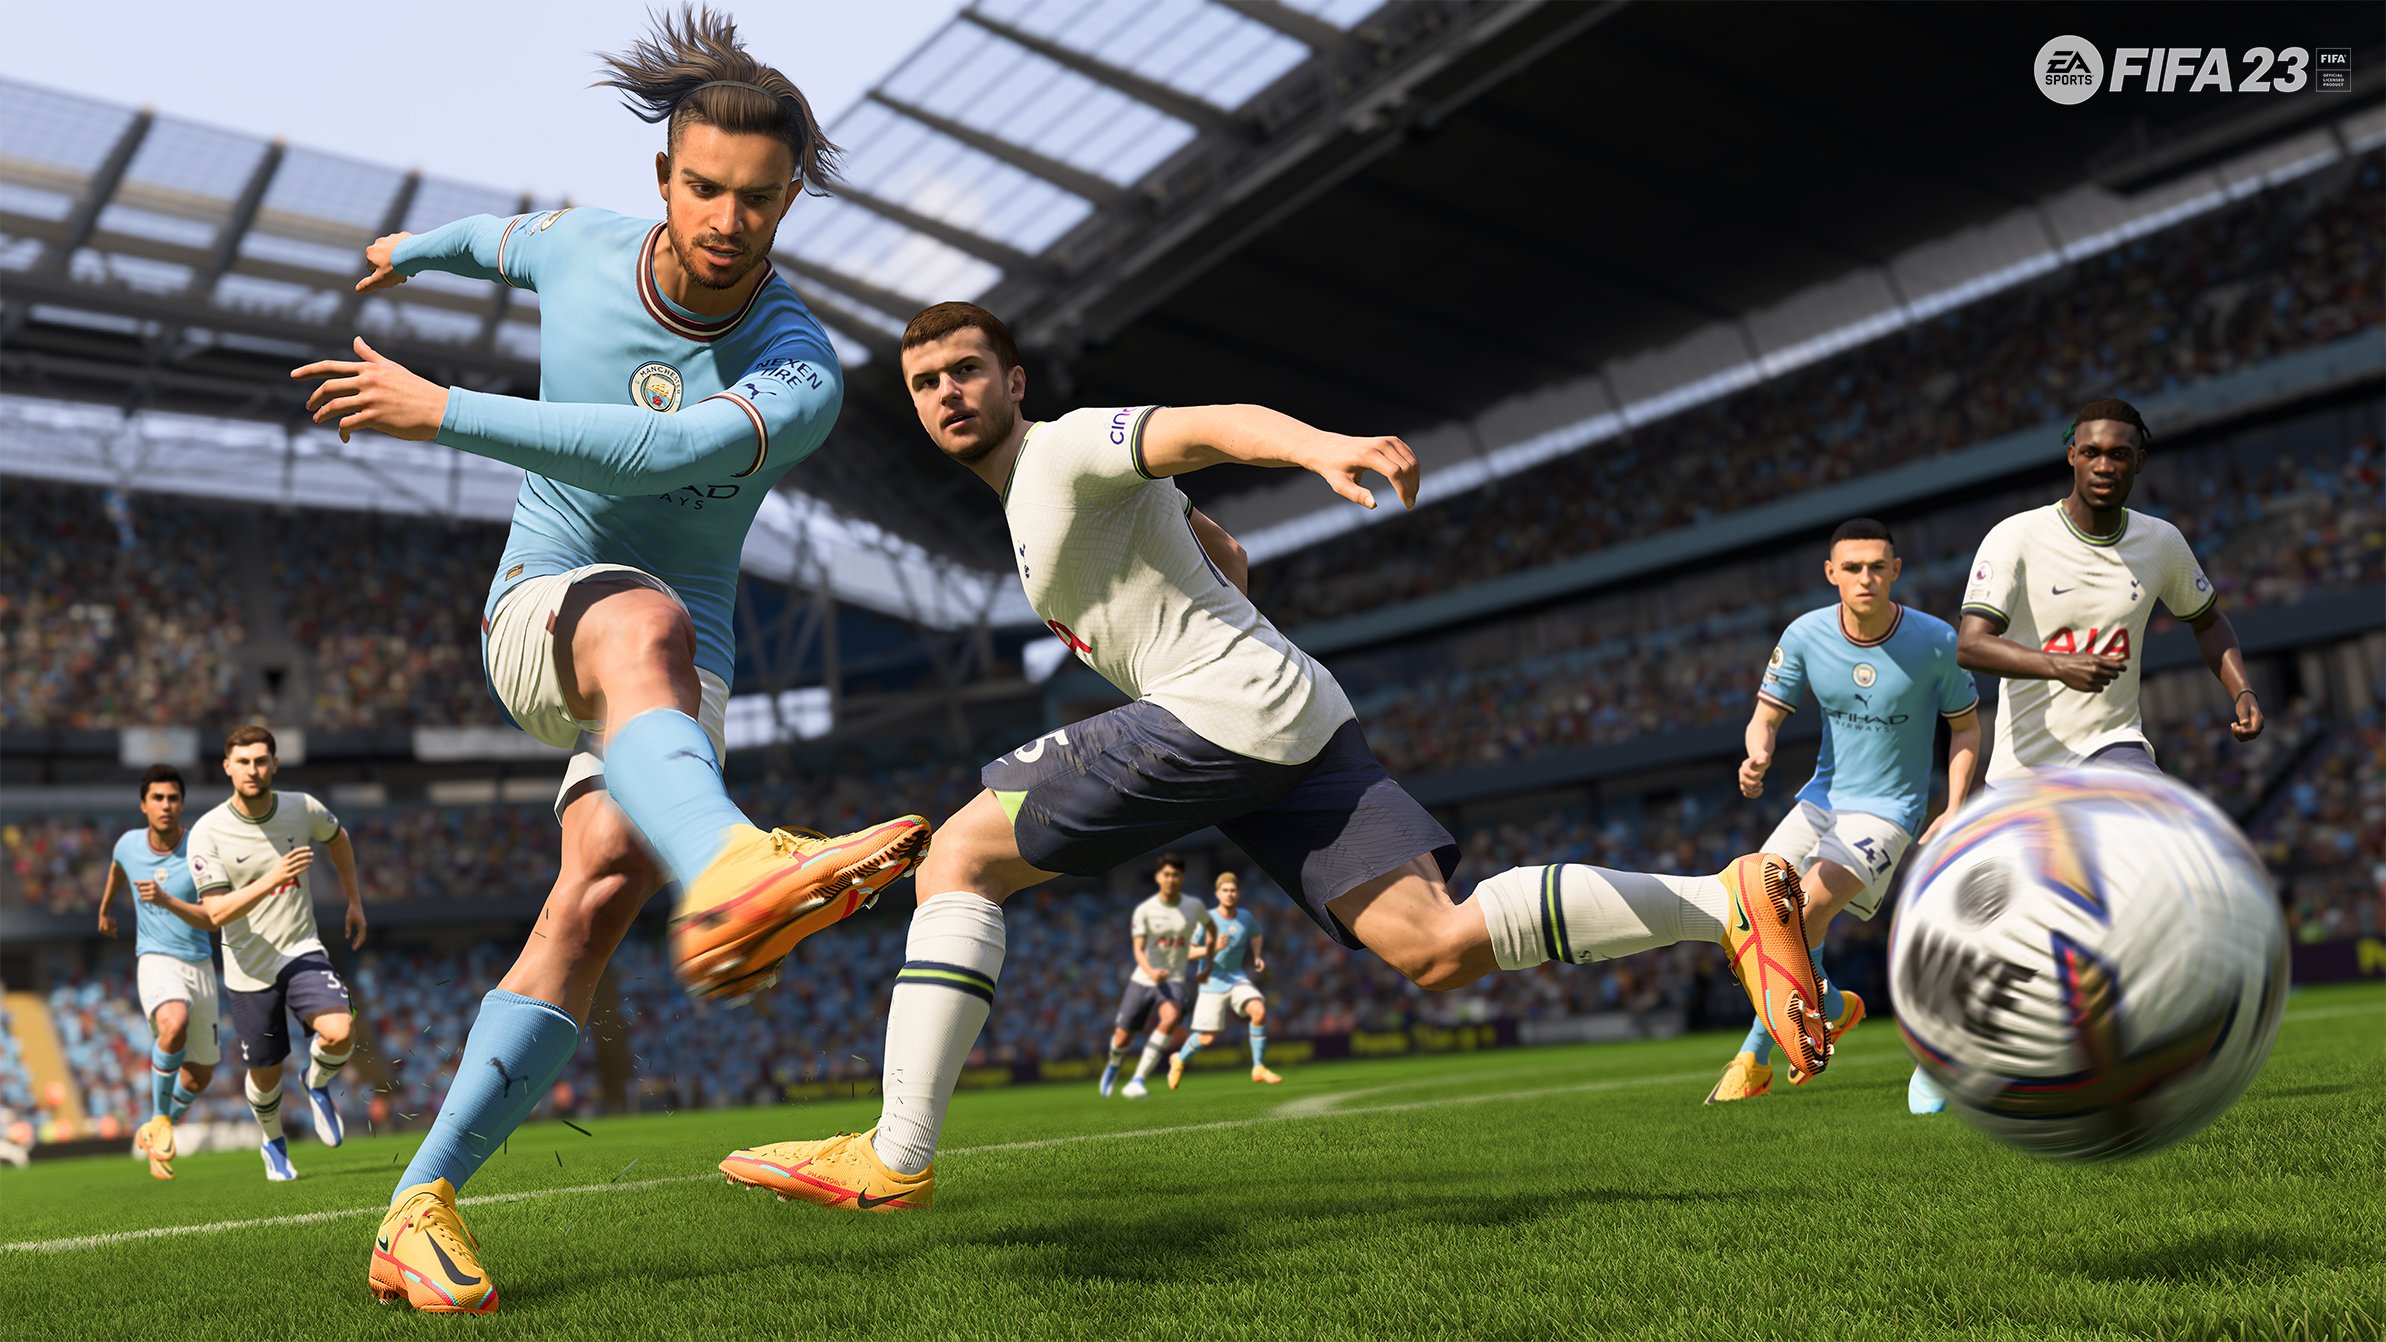 Fifa 23 is Now Available on Microsoft's xCloud Cloud Gaming